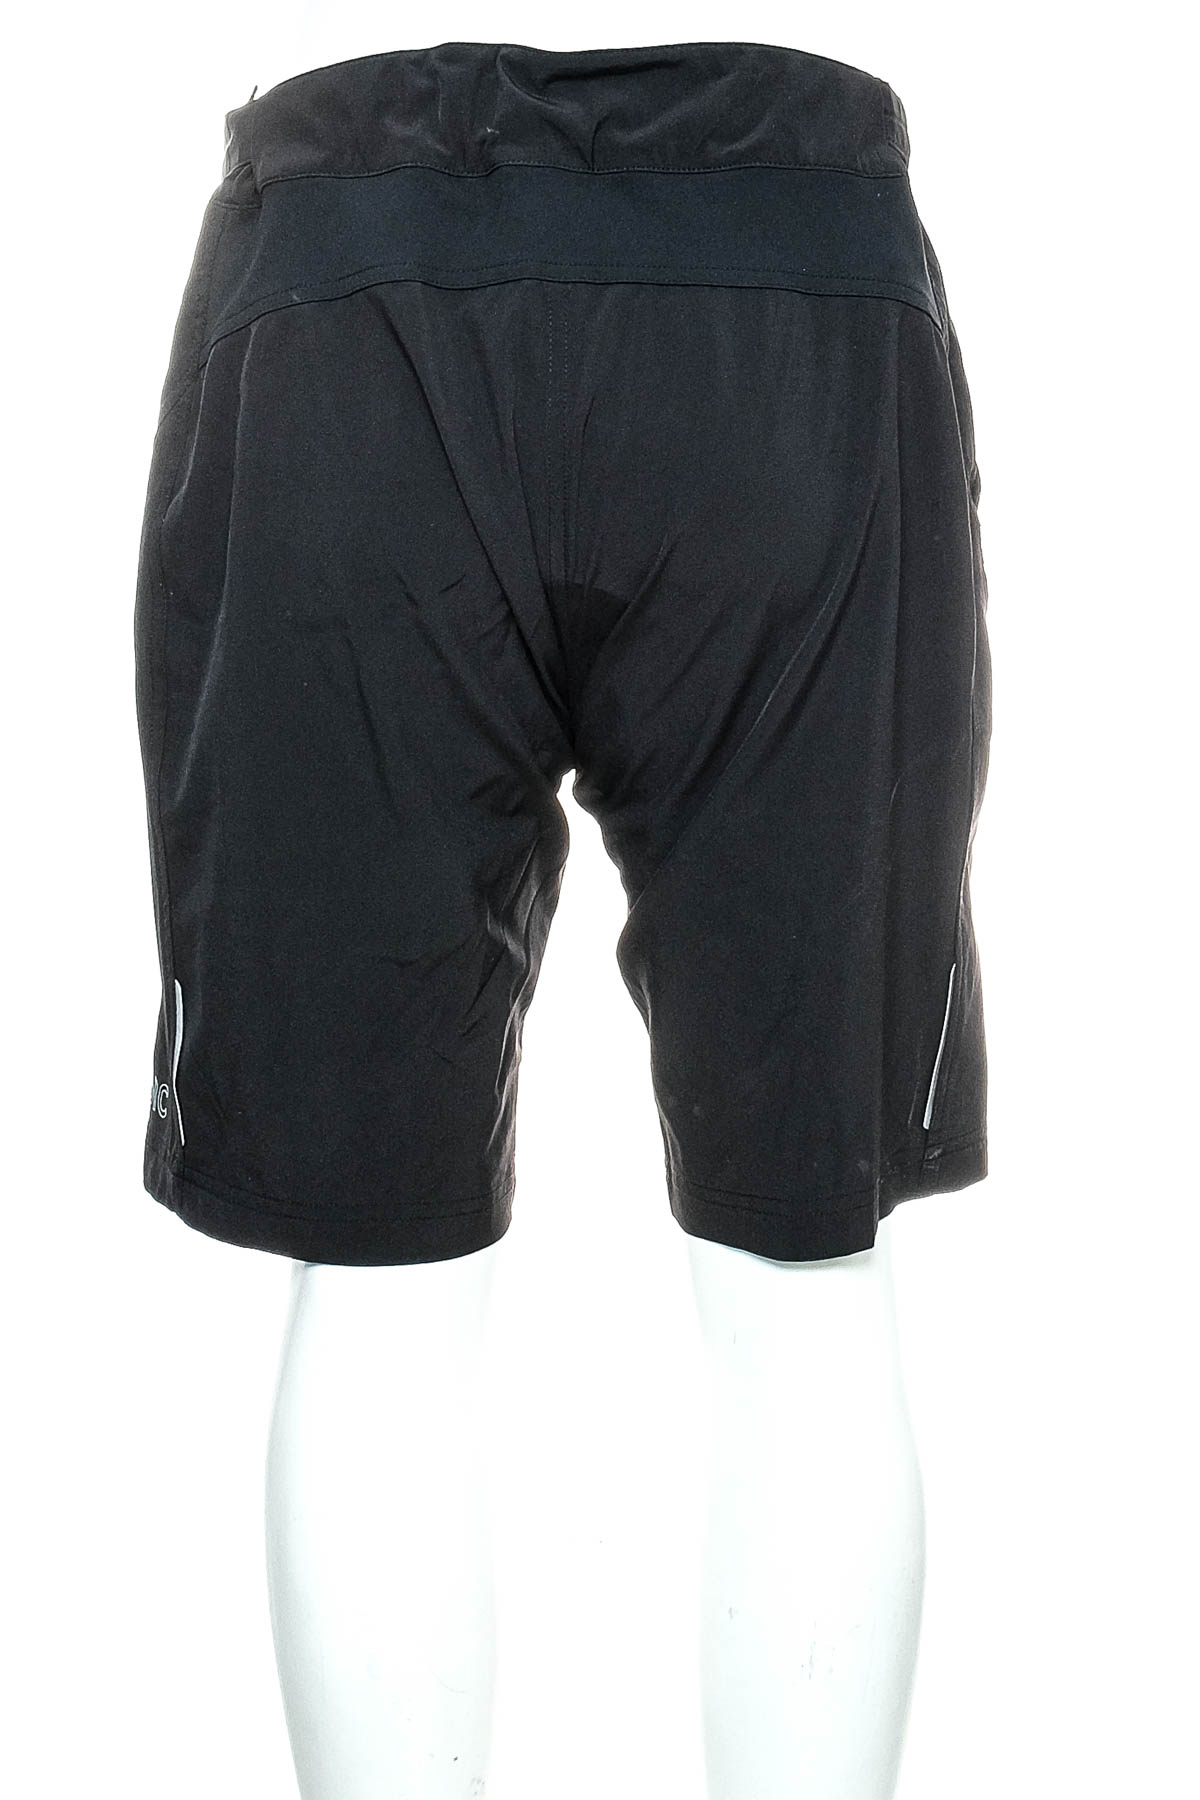 Female shorts for cycling - STOIC - 1